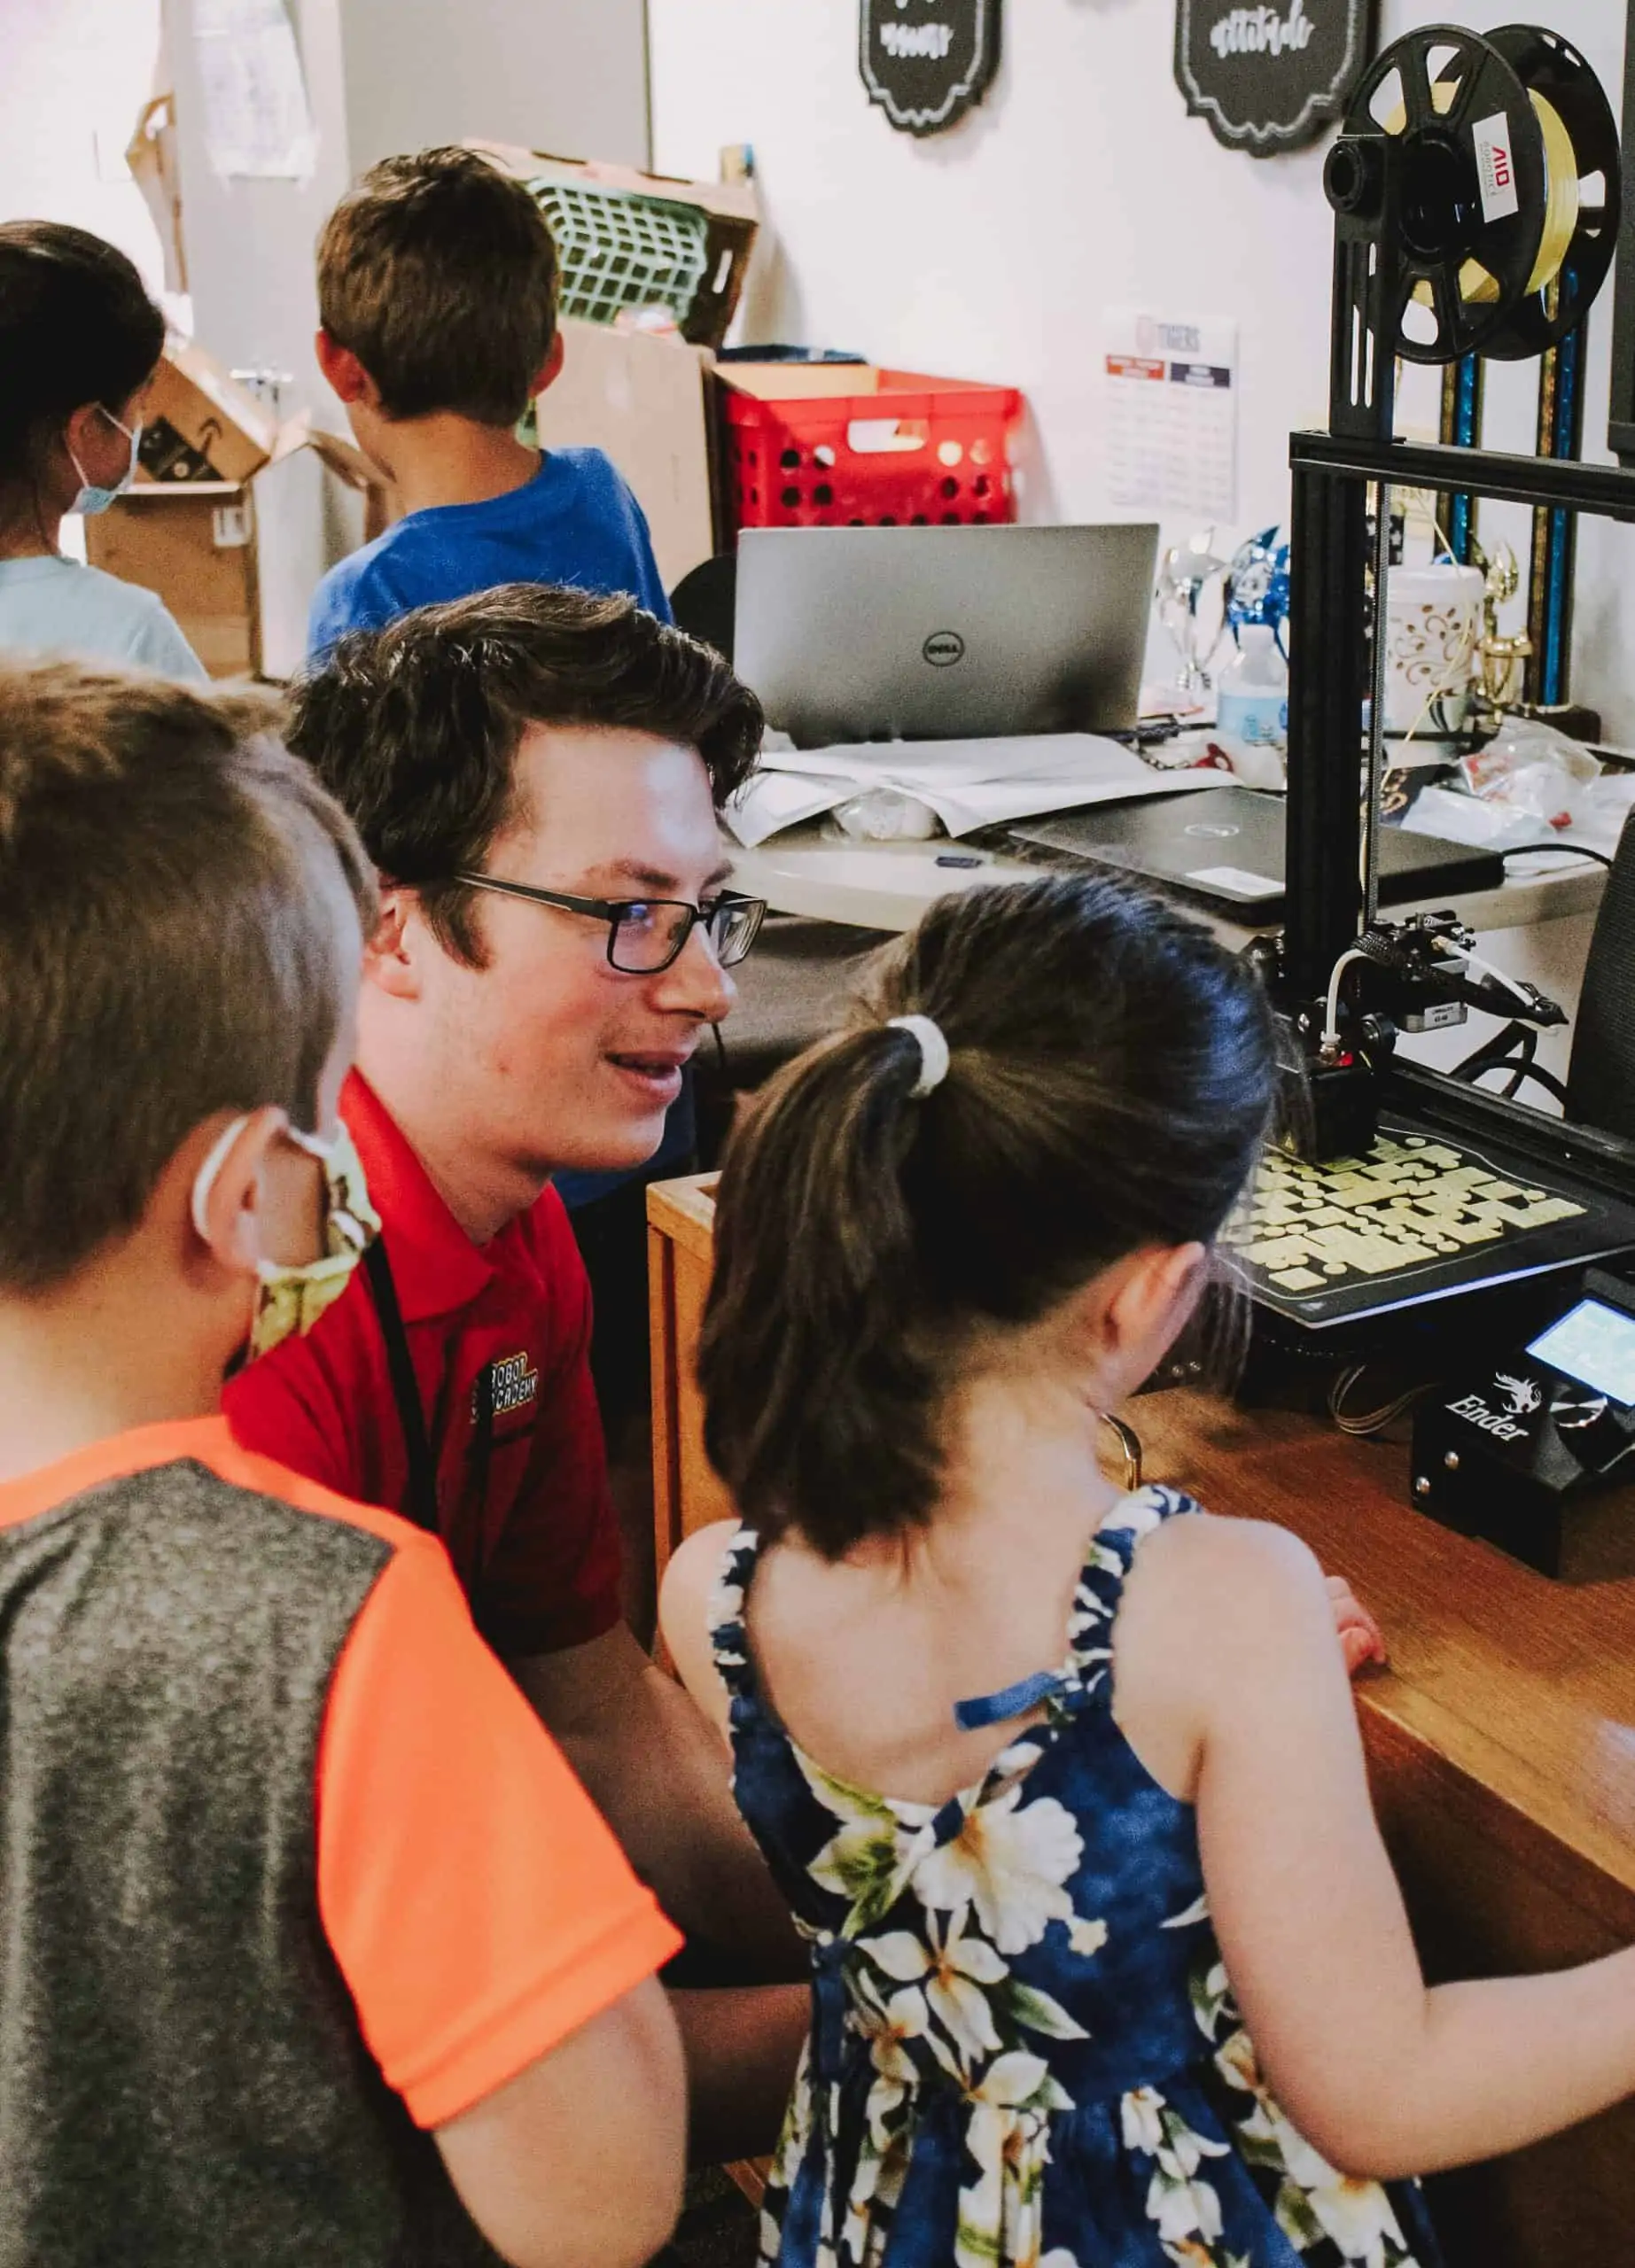 You are currently viewing Sr. LEGO® Robotics & 3D Printing Camp for ages 8 to 12 | Morning with Catered Snack| 4 Days: July 18-21, 2023  |  9 am to 12:30 pm  | Westerville